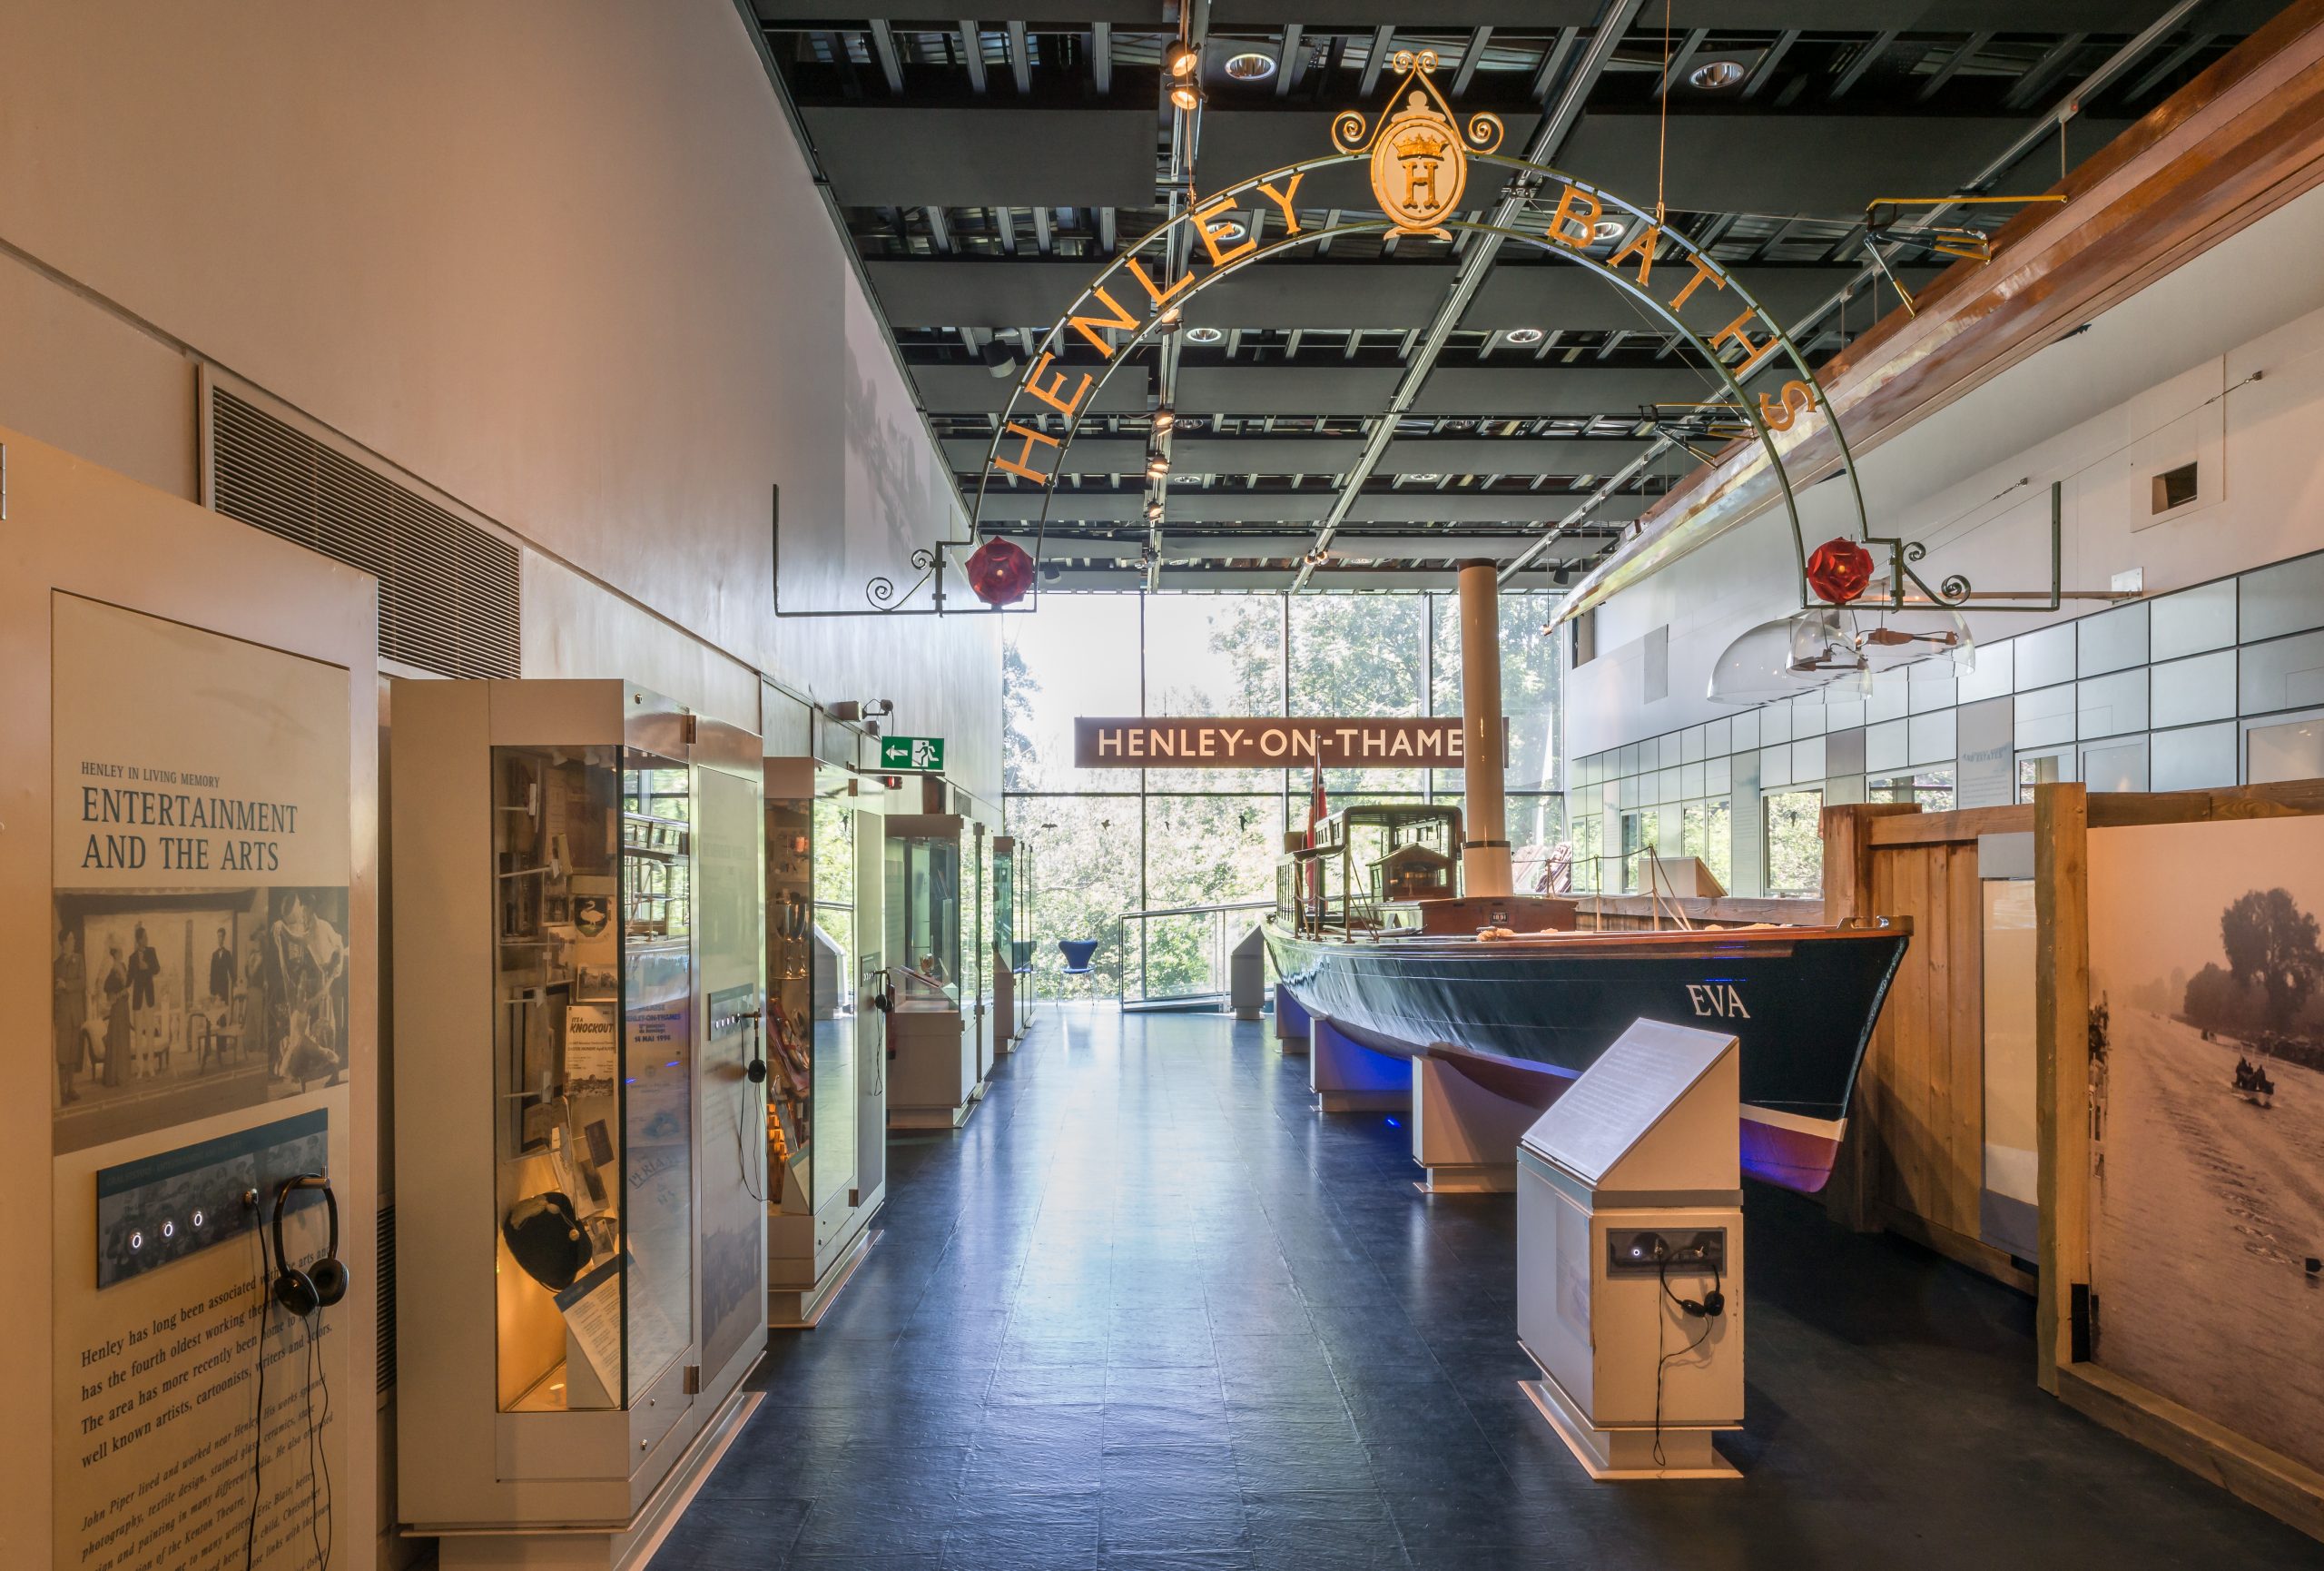 A long view through the Henley Gallery, with display cases on the left wall, a large boat on the right, and large signs for Henley on Thames and Henley Baths at height, before the light window at the end through which trees can be seen.